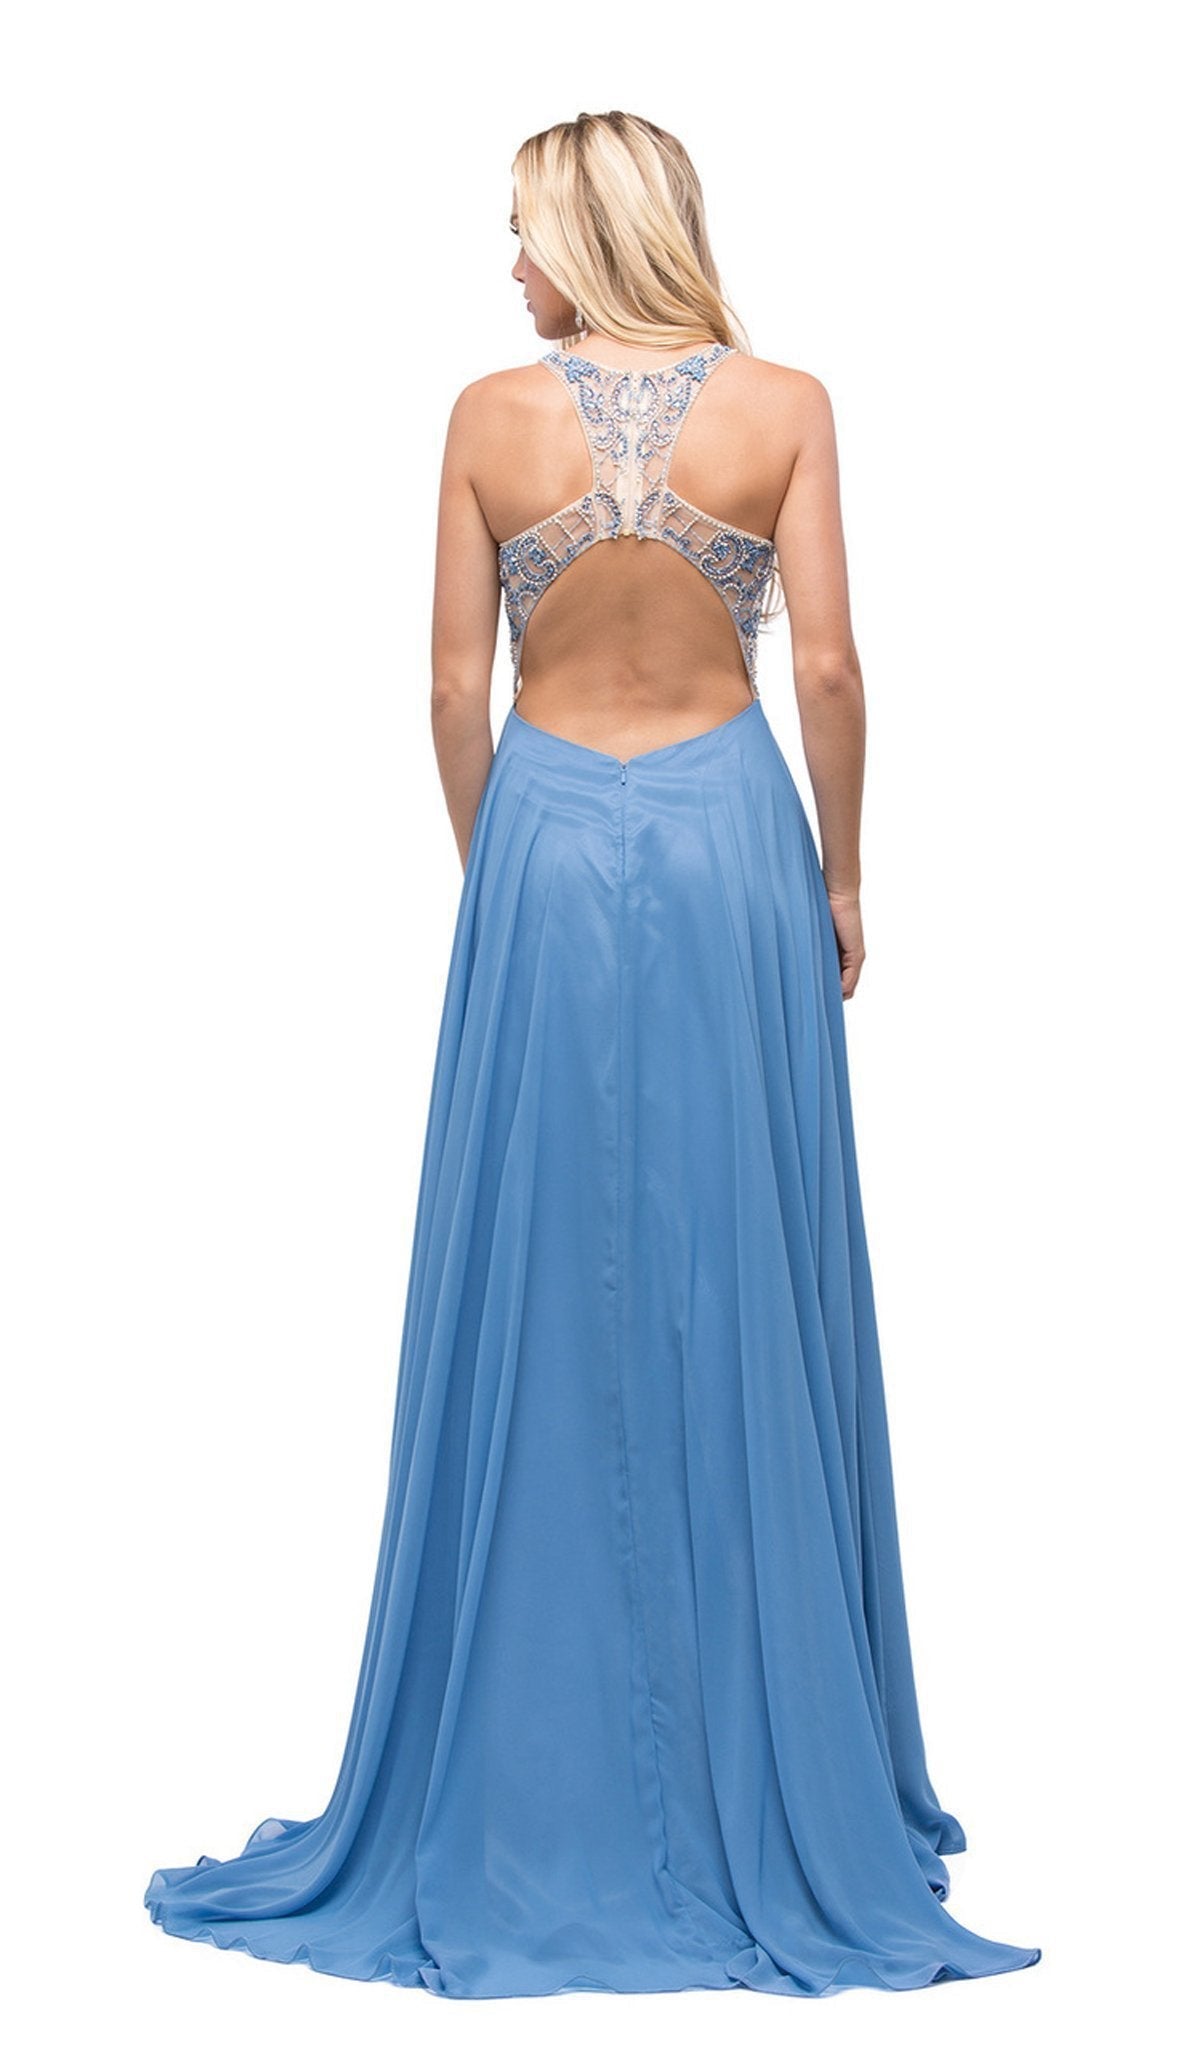 Dancing Queen - 9901 Beaded Illusion Scoop A-line Evening Dress Special Occasion Dress M / Perry Blue